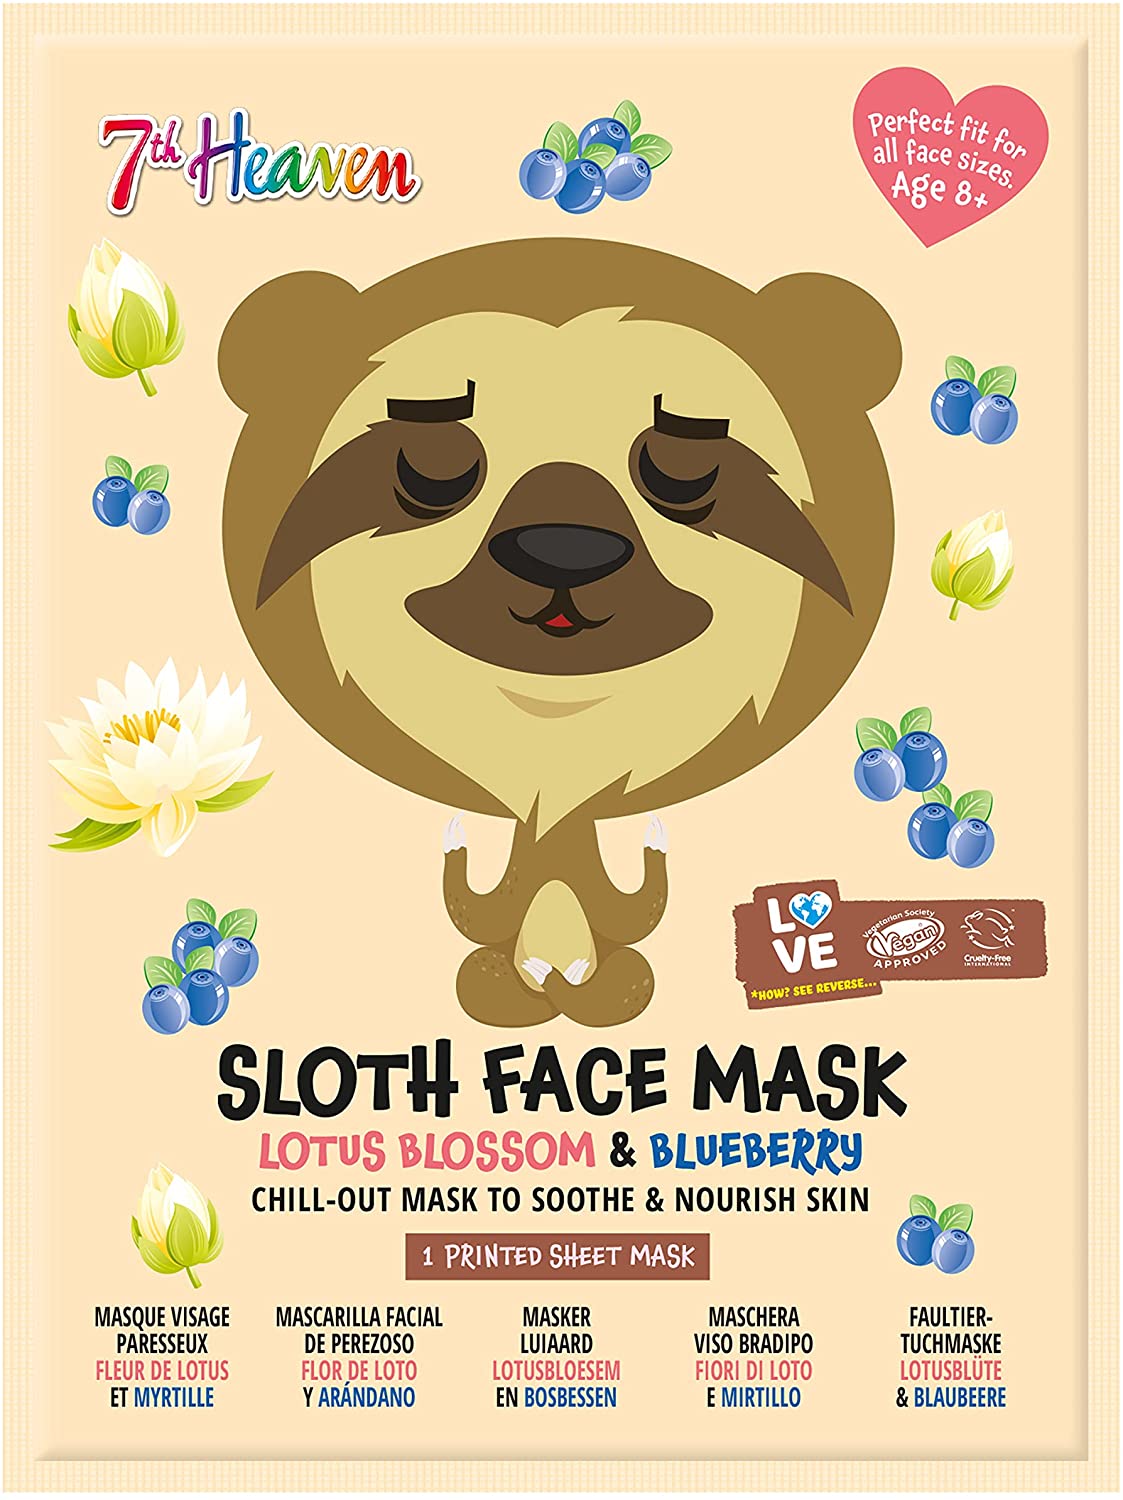 7th Heaven Sloth Face Sheet Mask with Lotus Blossom and Blueberry to Soothe and Nourish Skin